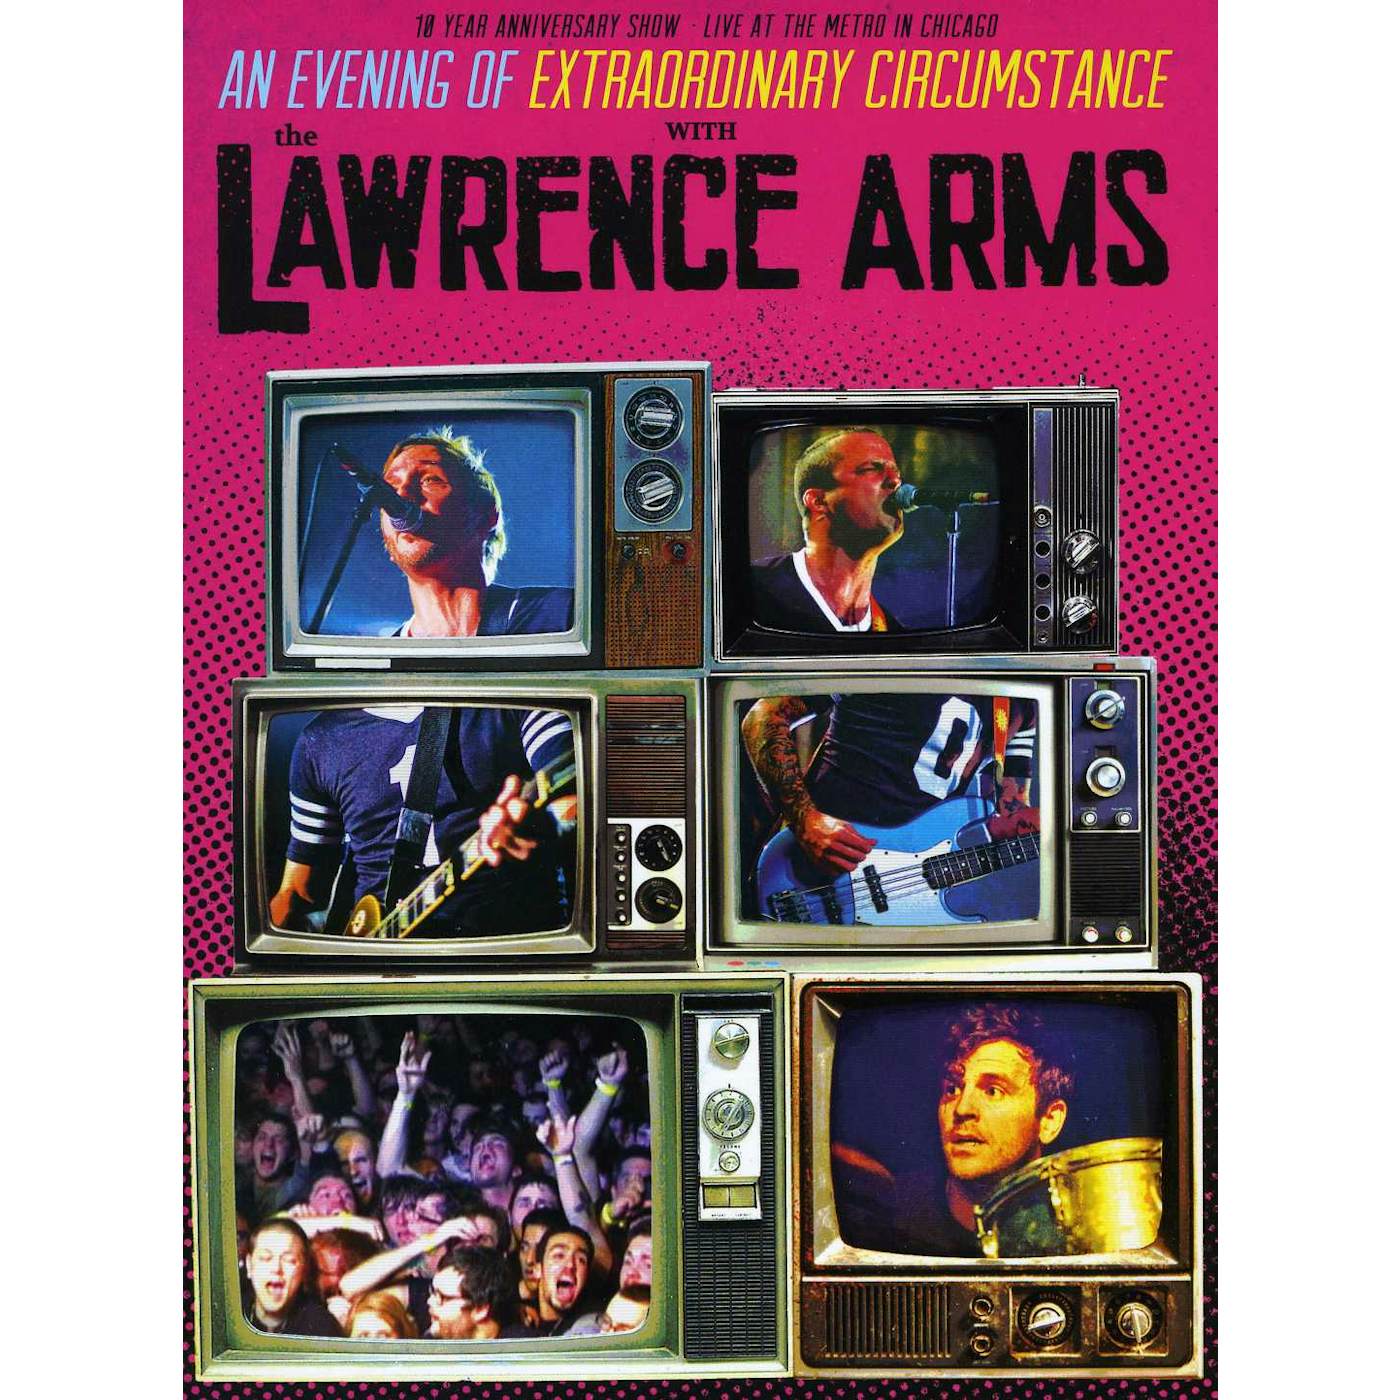 The Lawrence Arms AN EVENING OF EXTRAORDINARY CIRCUMSTANCE DVD